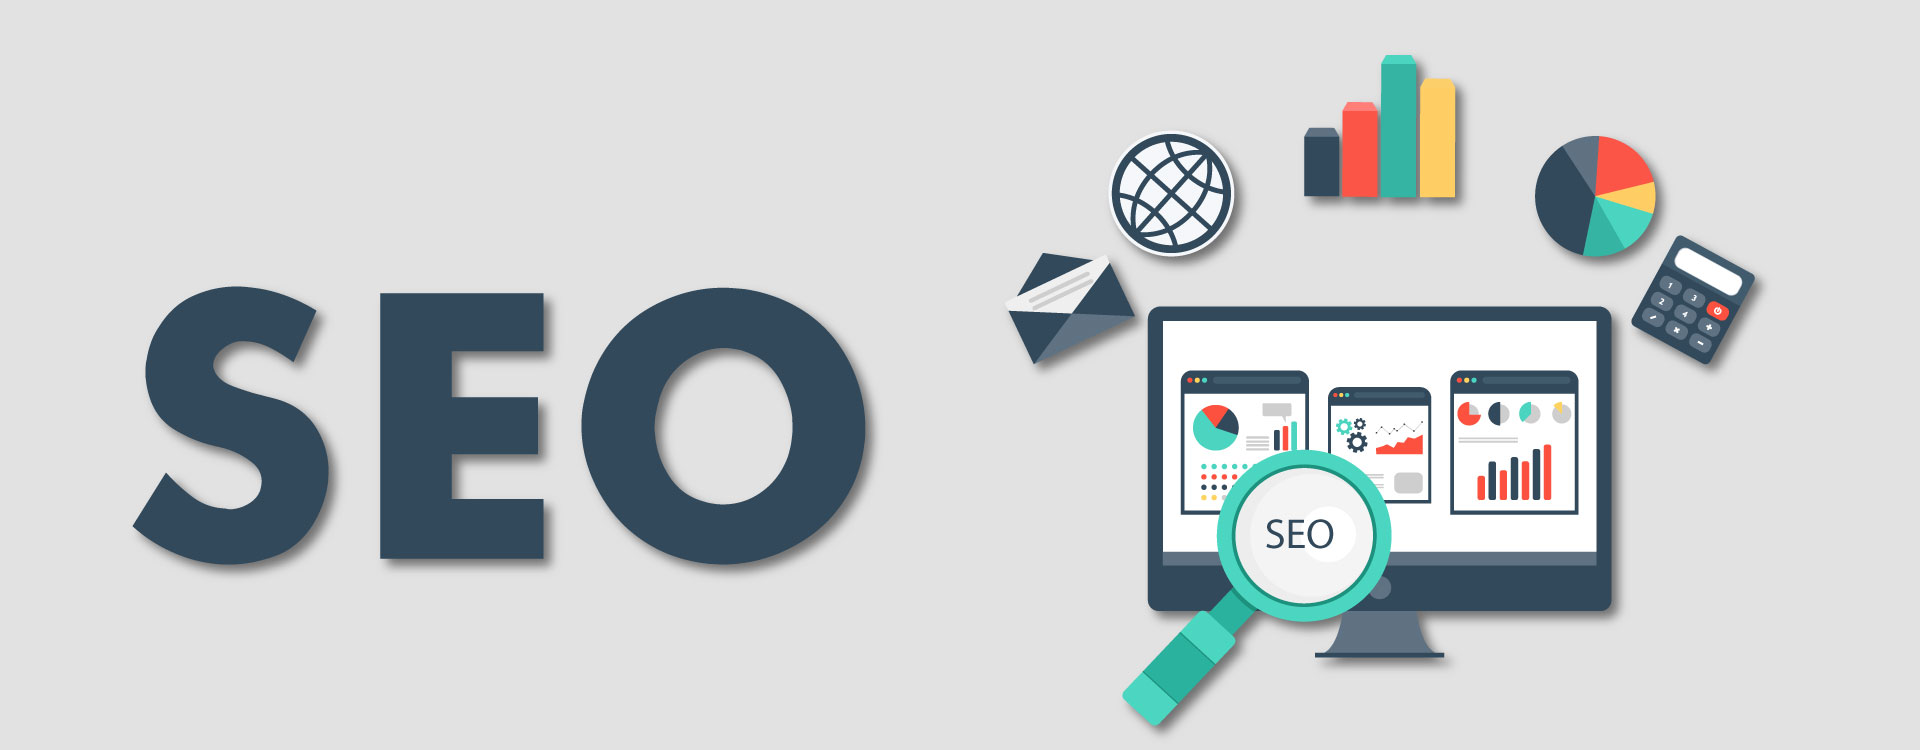 SEO Optimization for your business